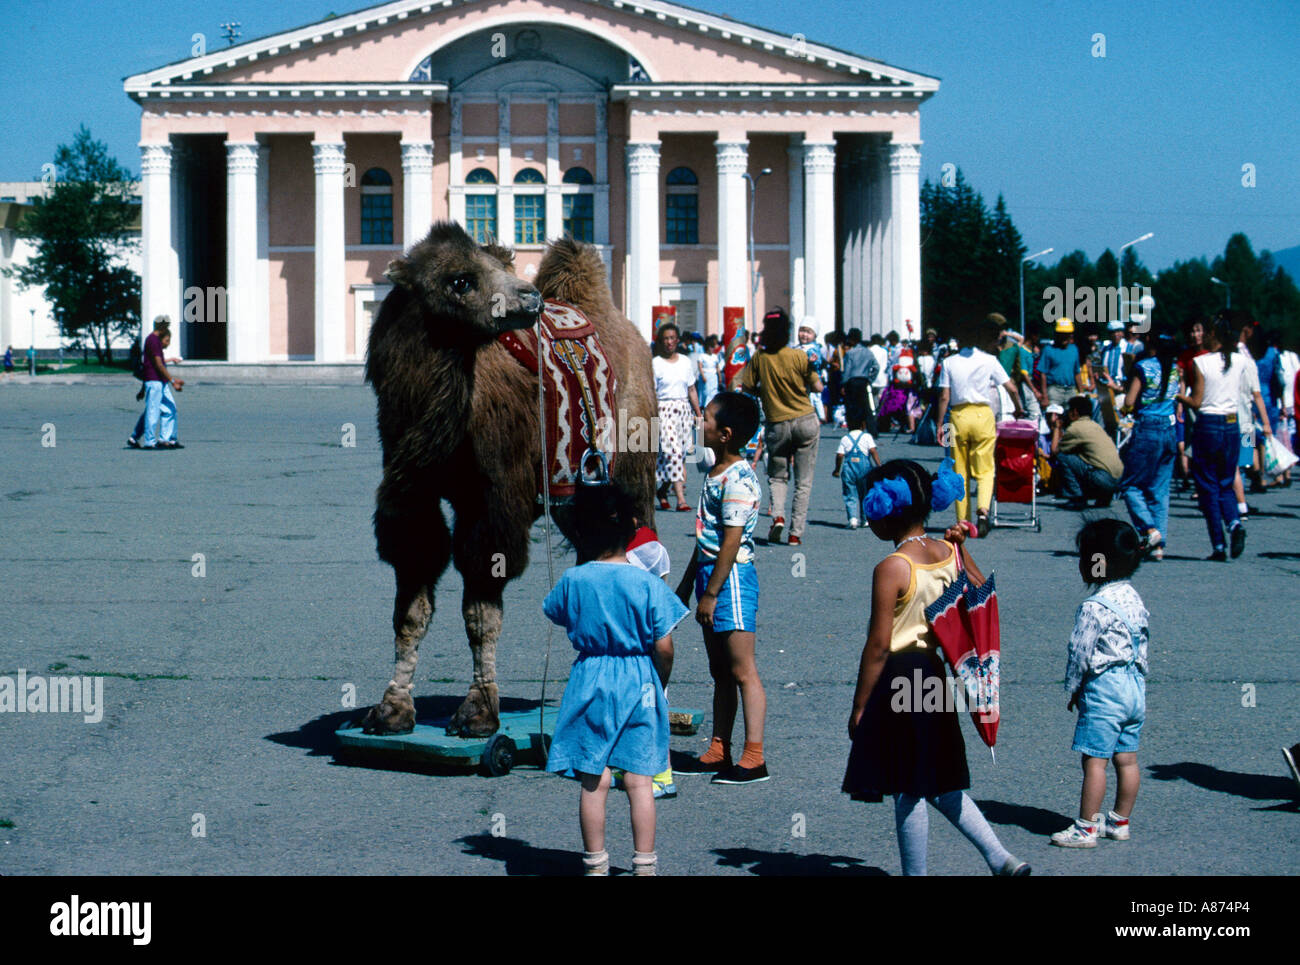 Mongolia a stuffed camel in front of the opera house on the Sukbaatar plaza in Ulaanbaatar Stock Photo